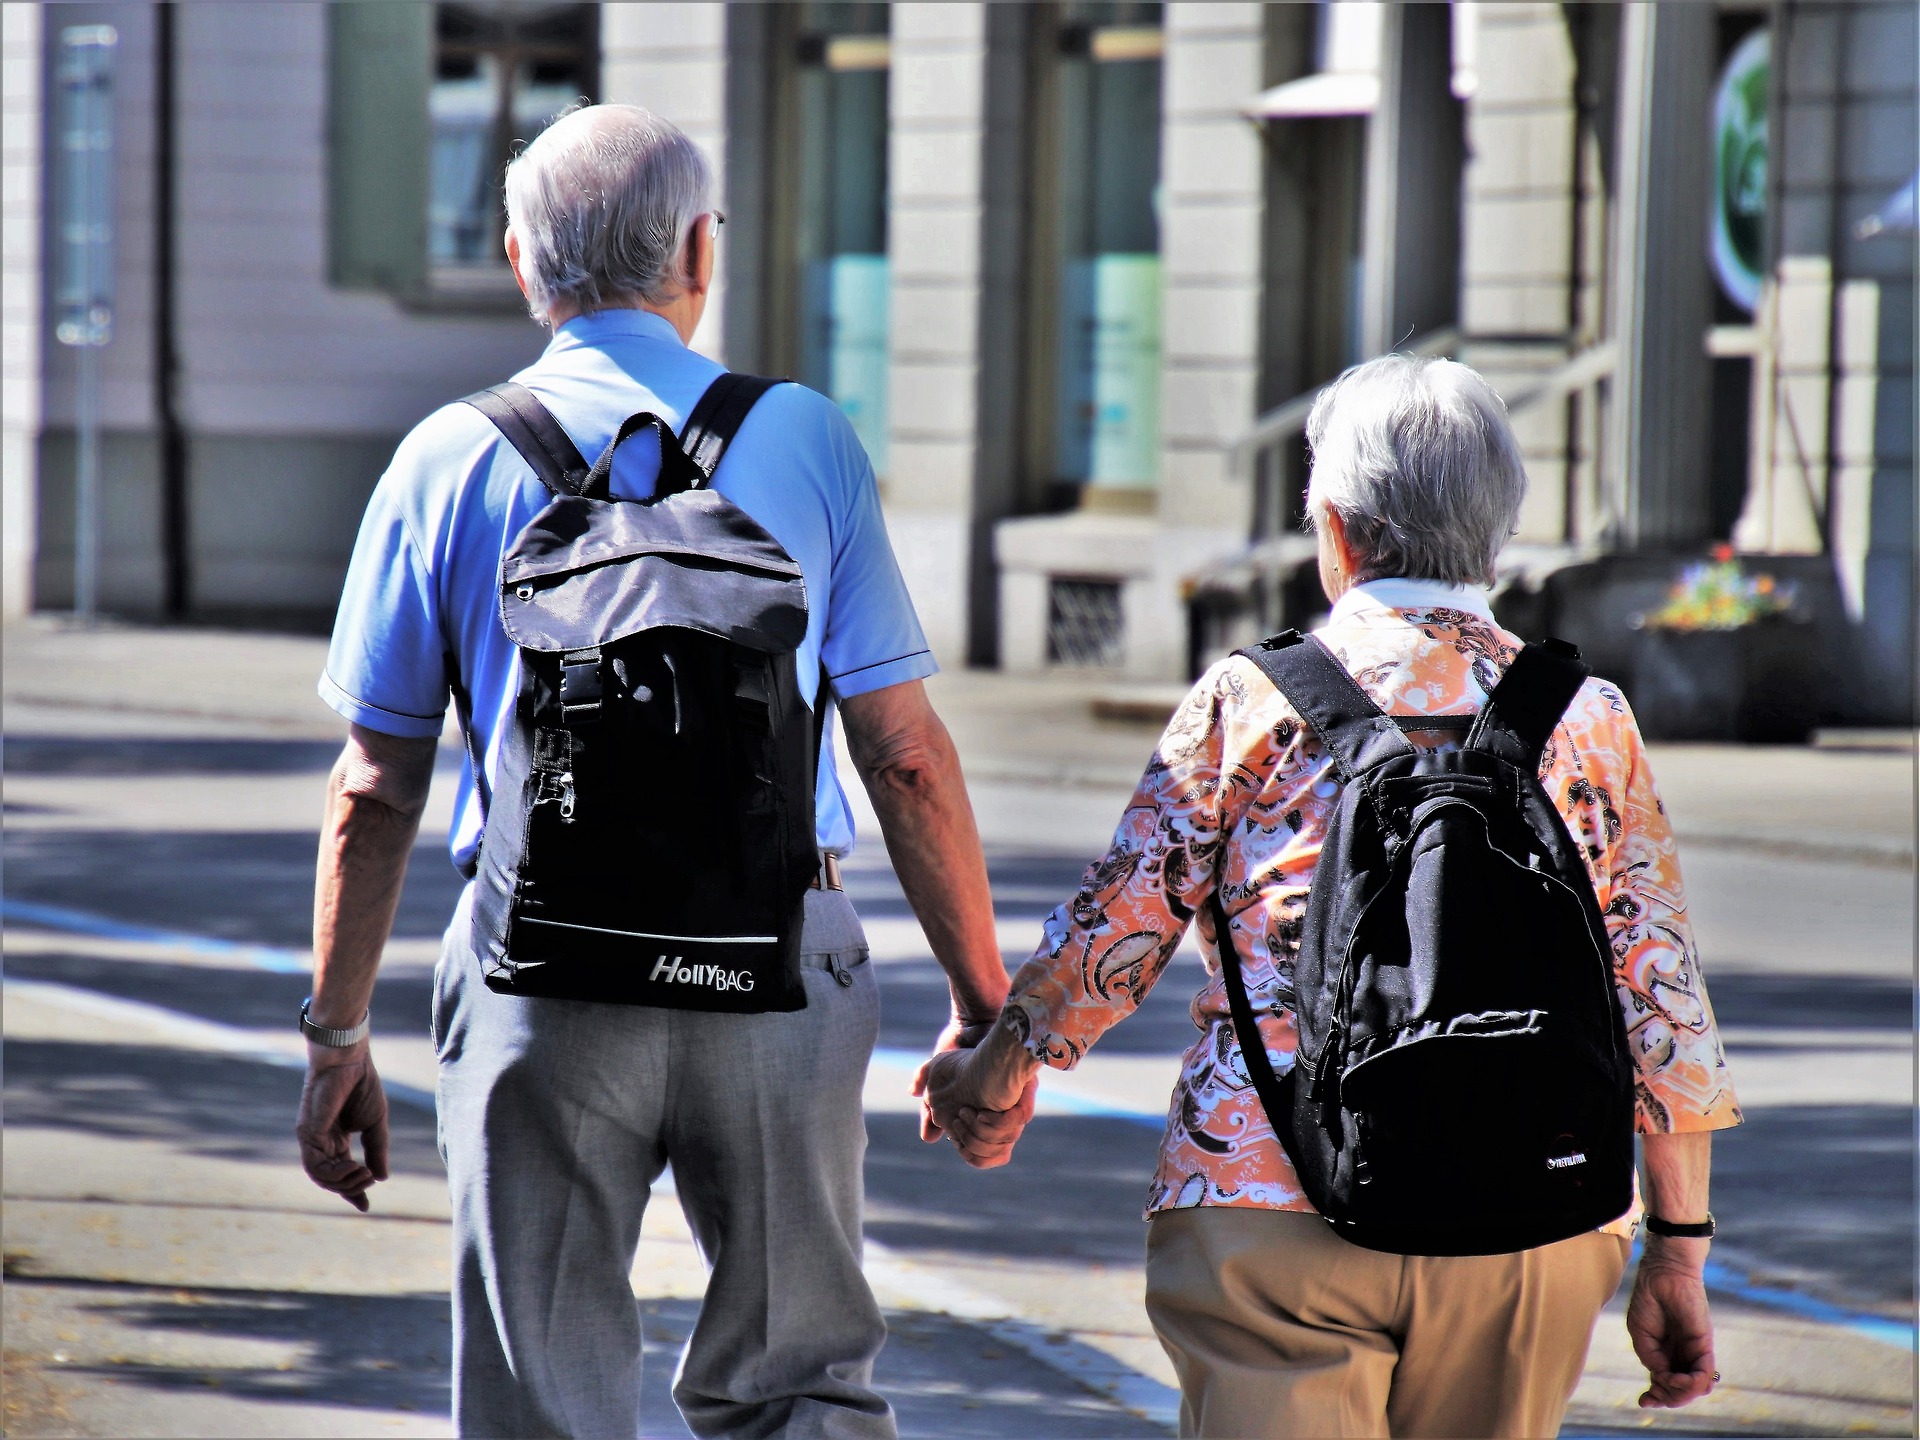 The study will compare the characteristics of health and lifestyle habits of residents aged 70 to 79 years in Lleida and Seville – DUPO – Journal of the Pablo de Olavide University